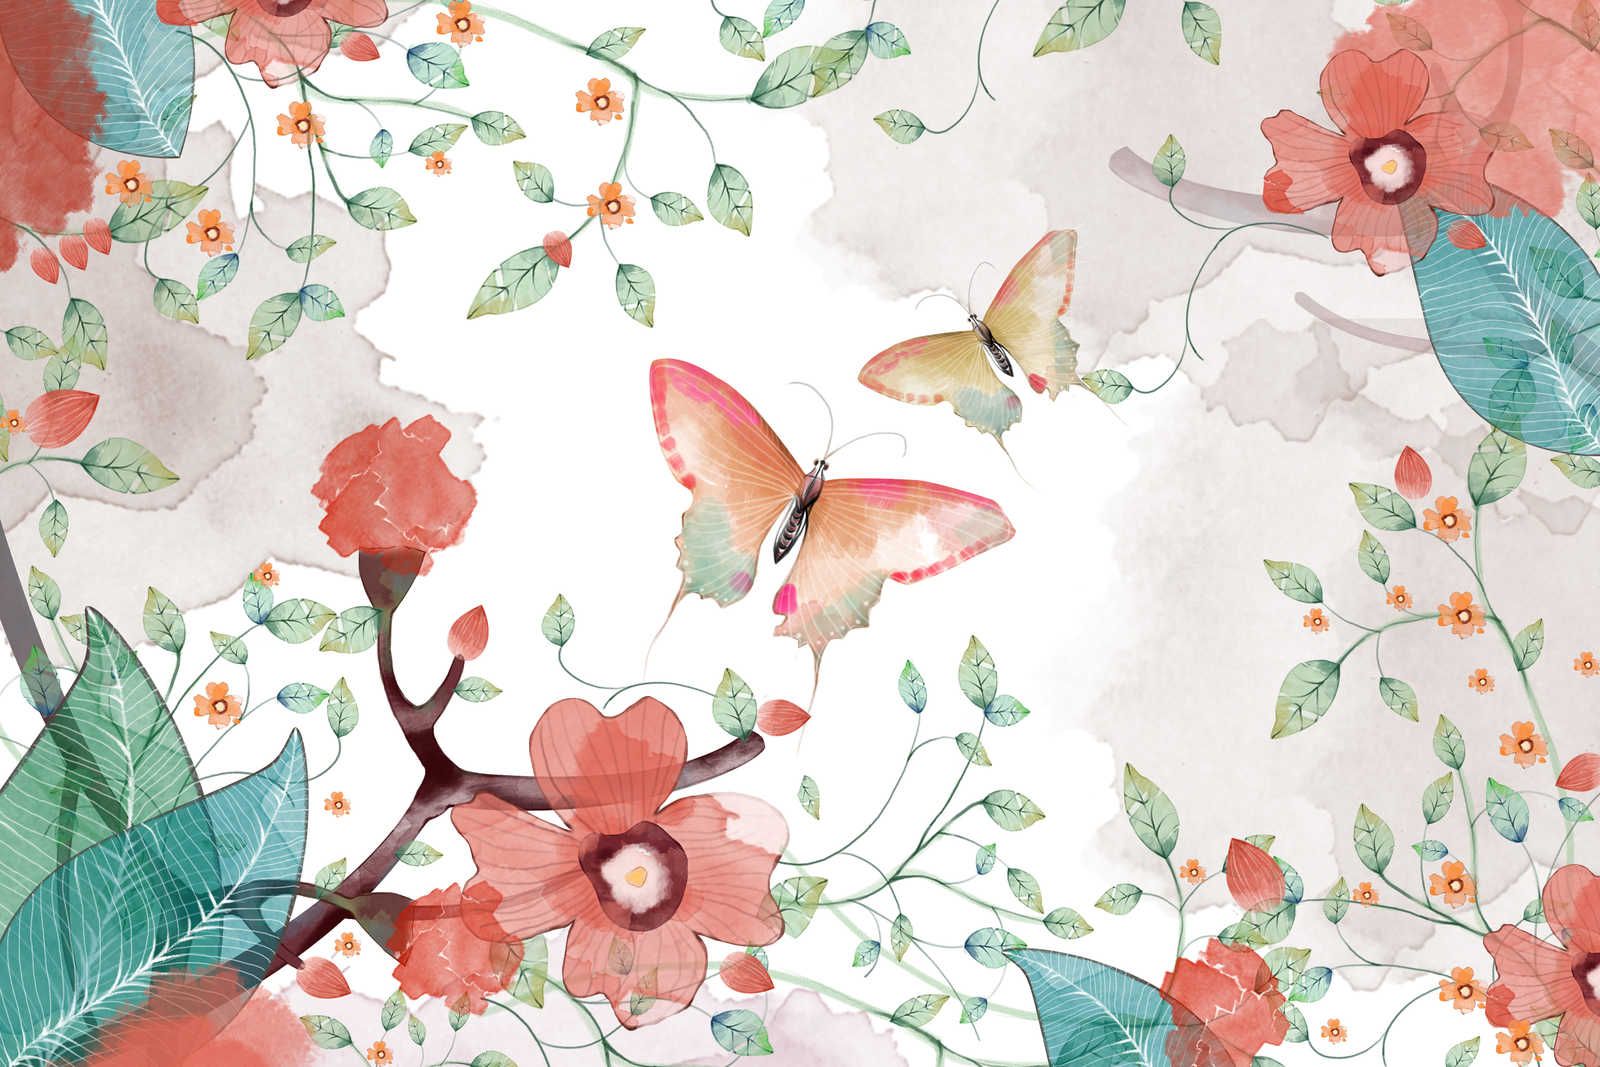             Canvas floral with leaves and butterflies - 120 cm x 80 cm
        